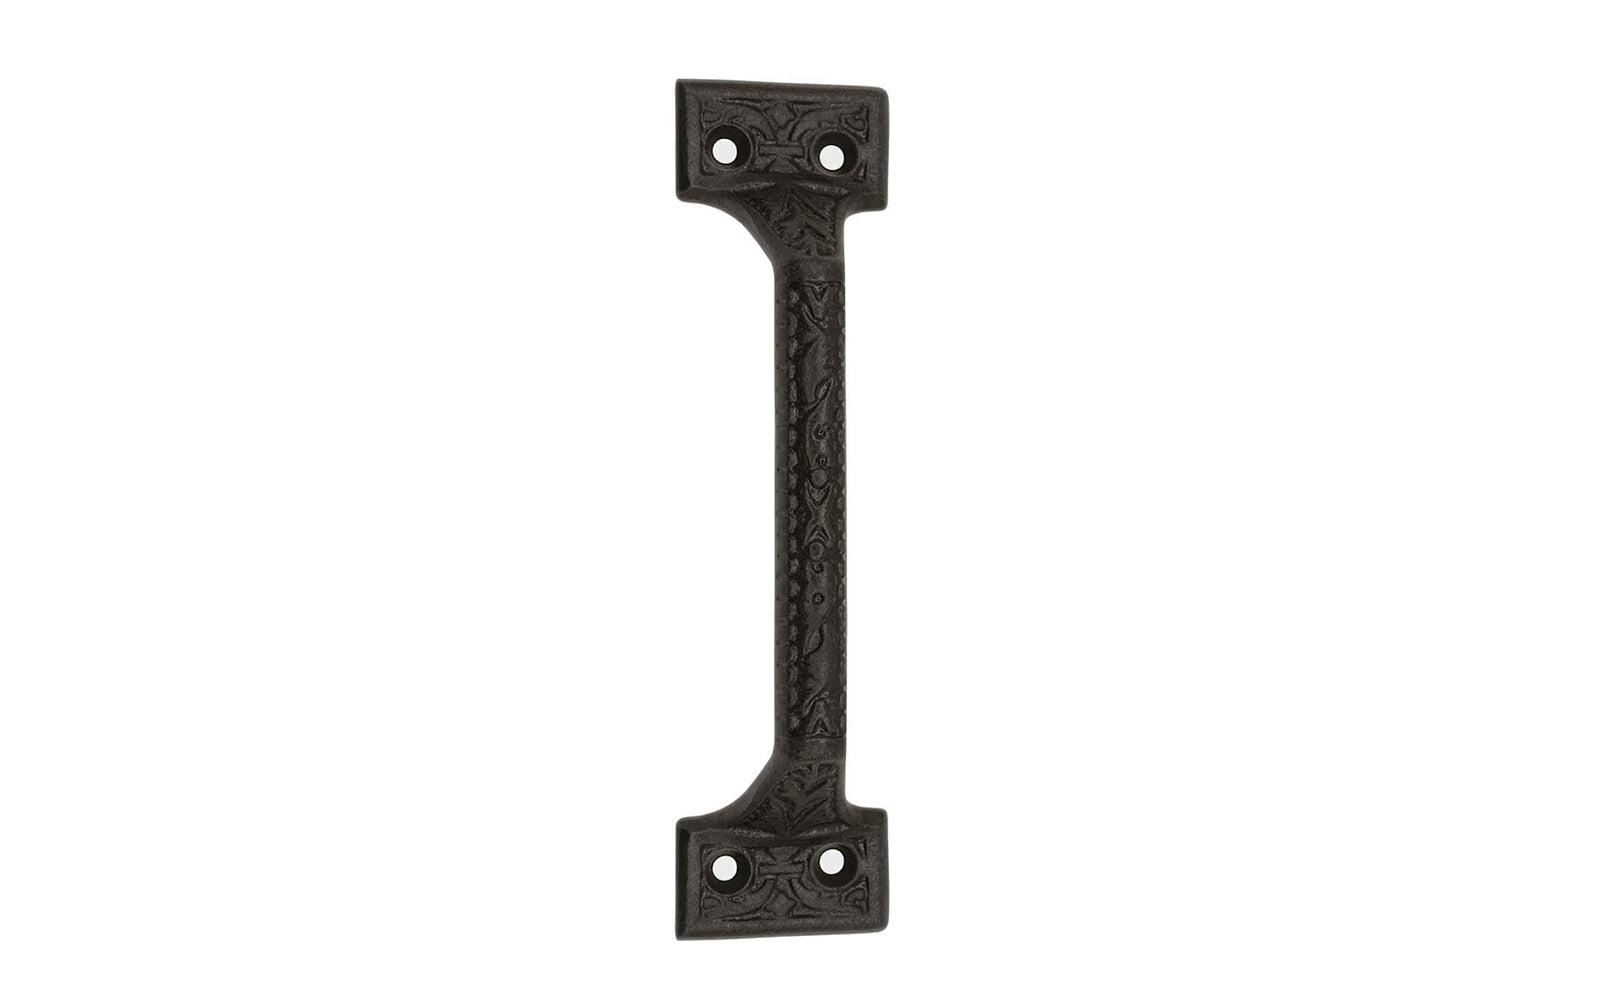 A rustic-looking Victorian style door pull handle. Made of strong cast iron material, it has a nice durable & strong feel. This traditional & ornate piece of hardware is great for doors, gates, & large drawers. Powder coated to resist rust. Ornate Floral Design. Large Cabinet Handle - Cast Iron Door Pull - Model 88602